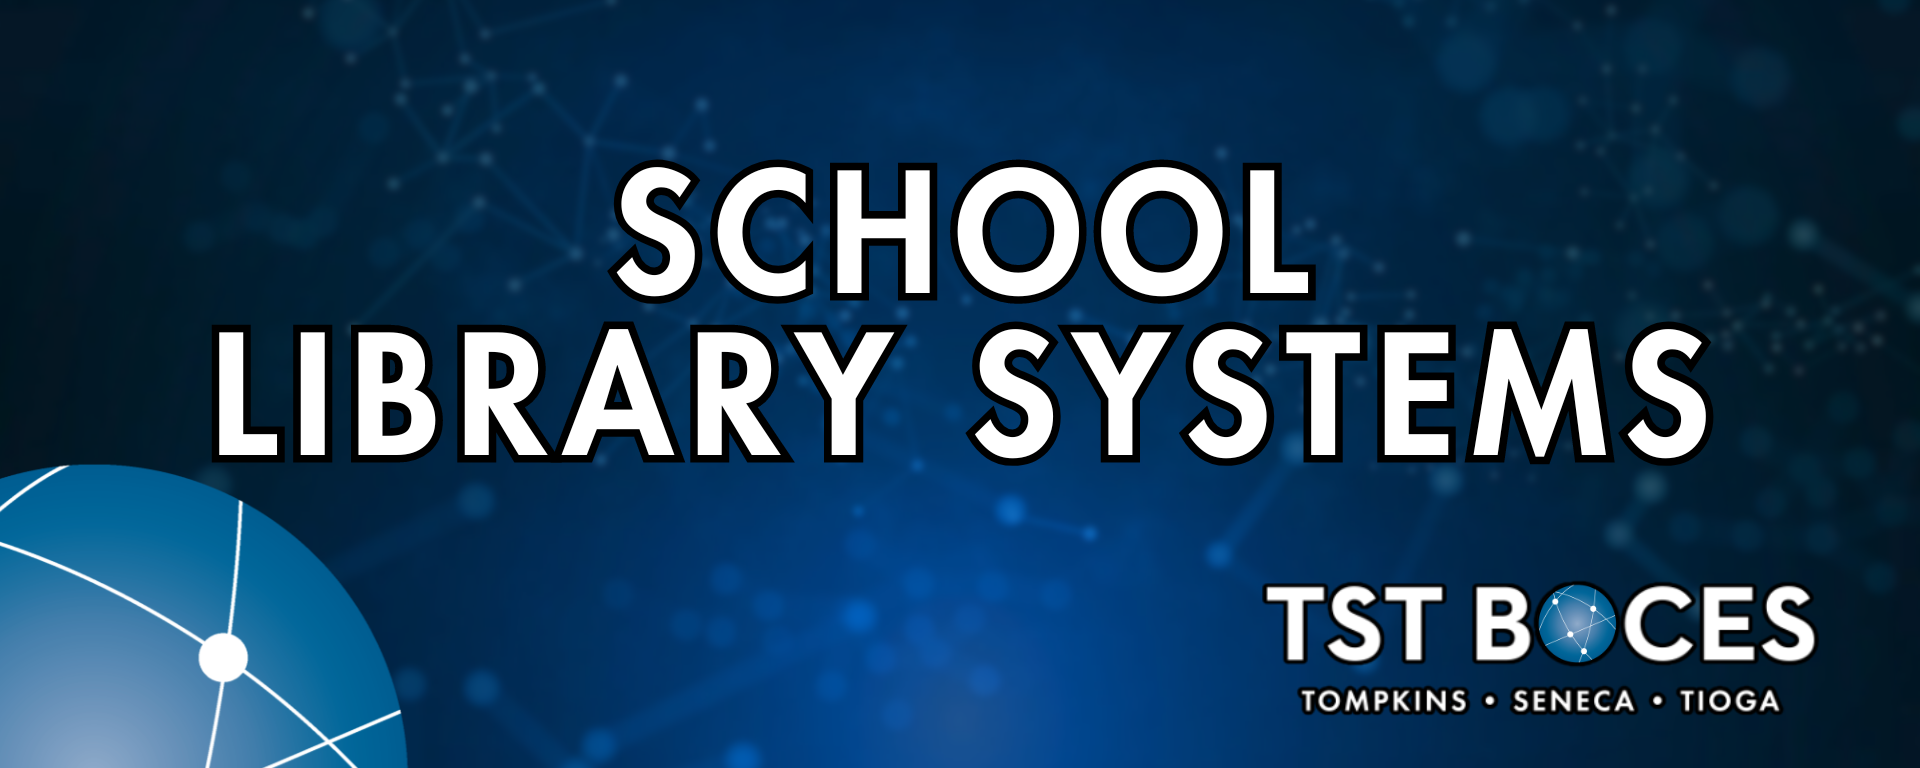 School library systems banner